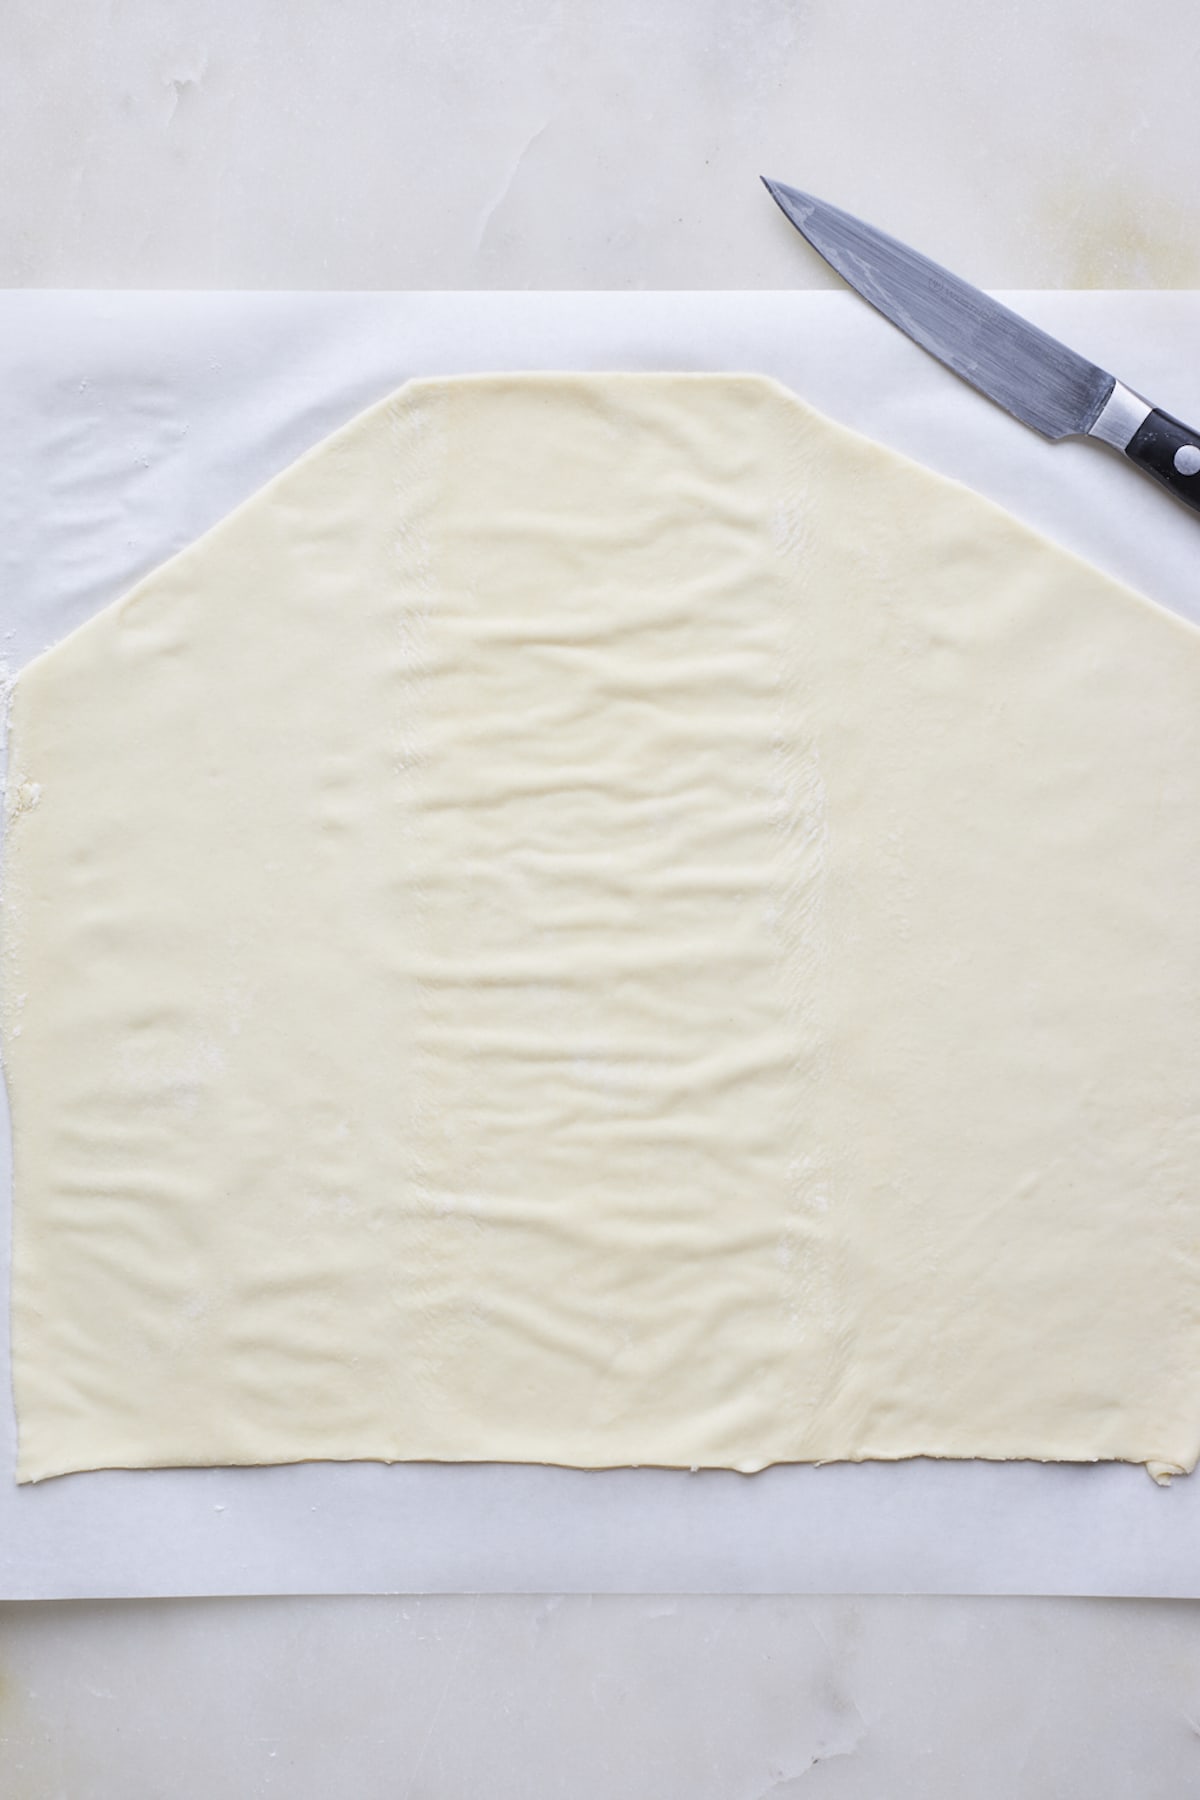 puff pastry sheet rolled out and cut with a knife to make a breakfast bread. 